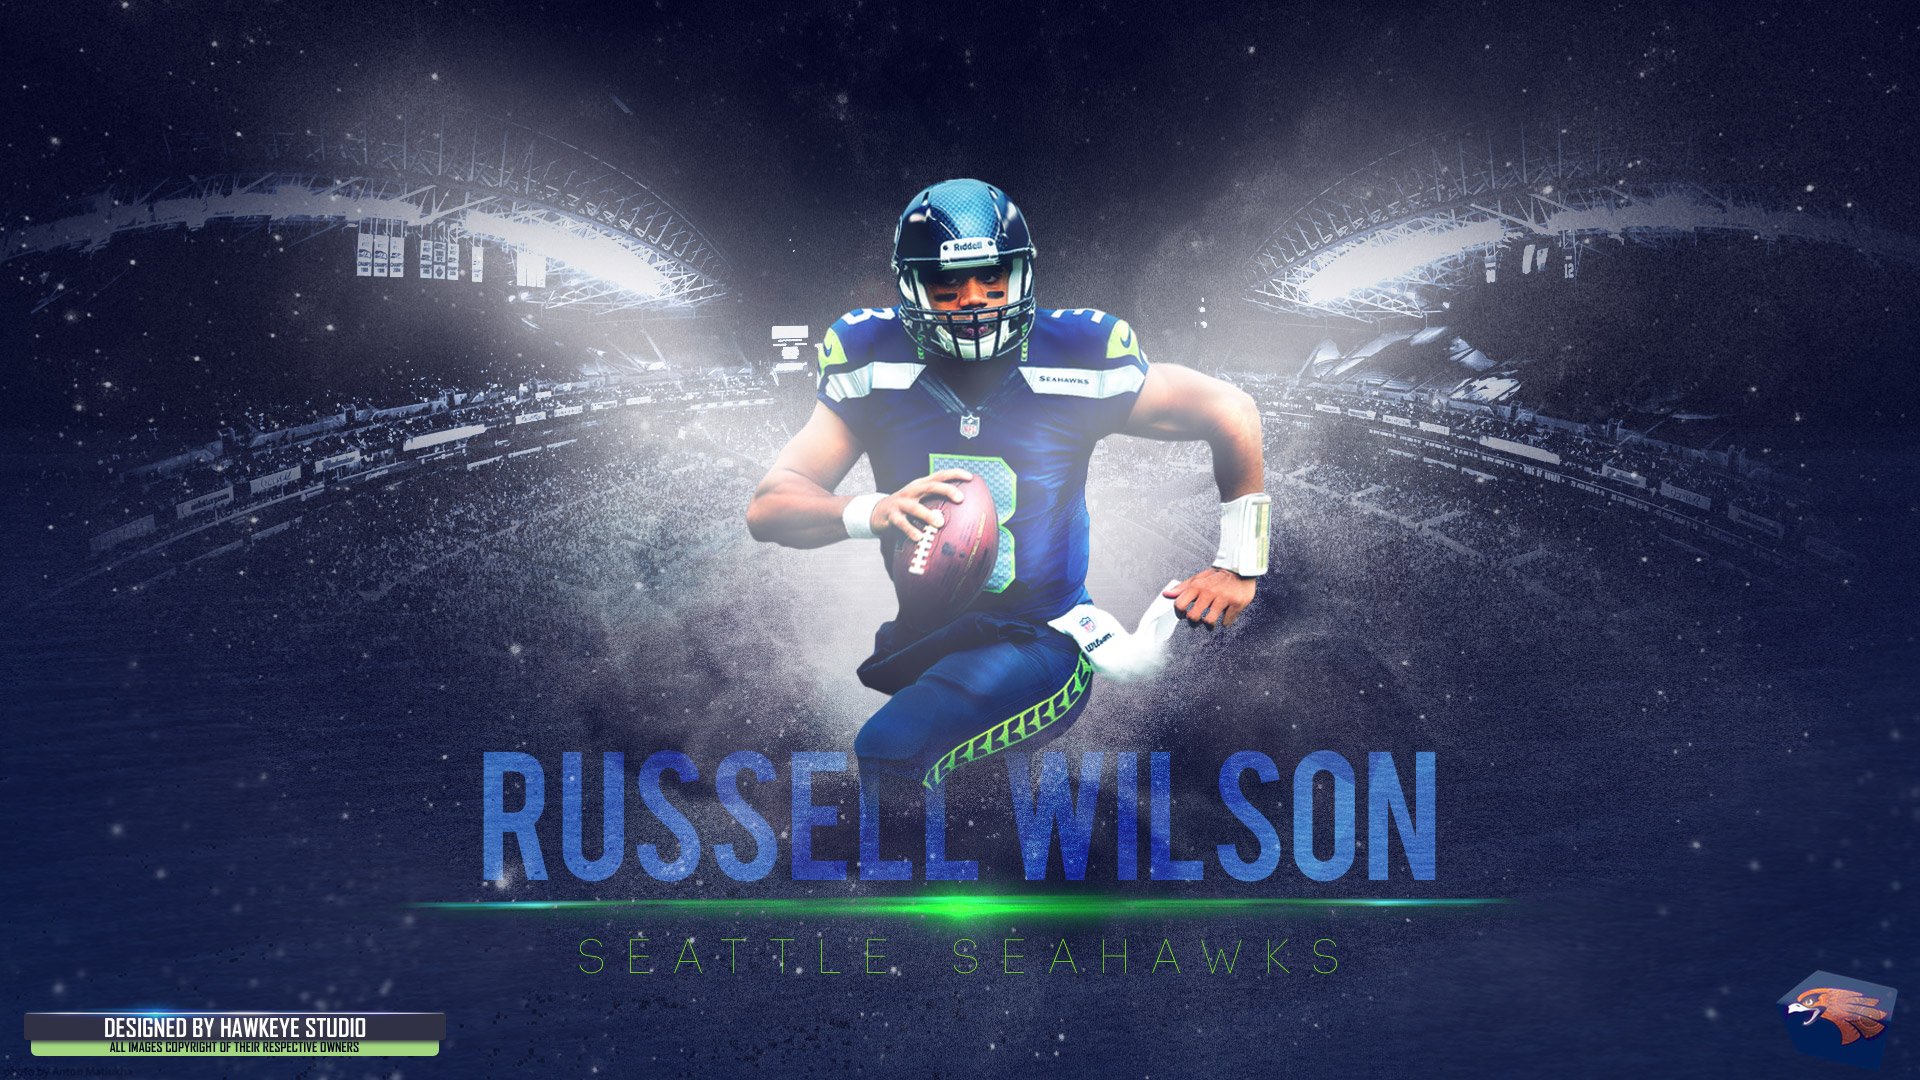 Happy Birthday to Russell Wilson!

Play Pickk when he plays against the Steelers tonight!

Tag a Seahawks Fan! 